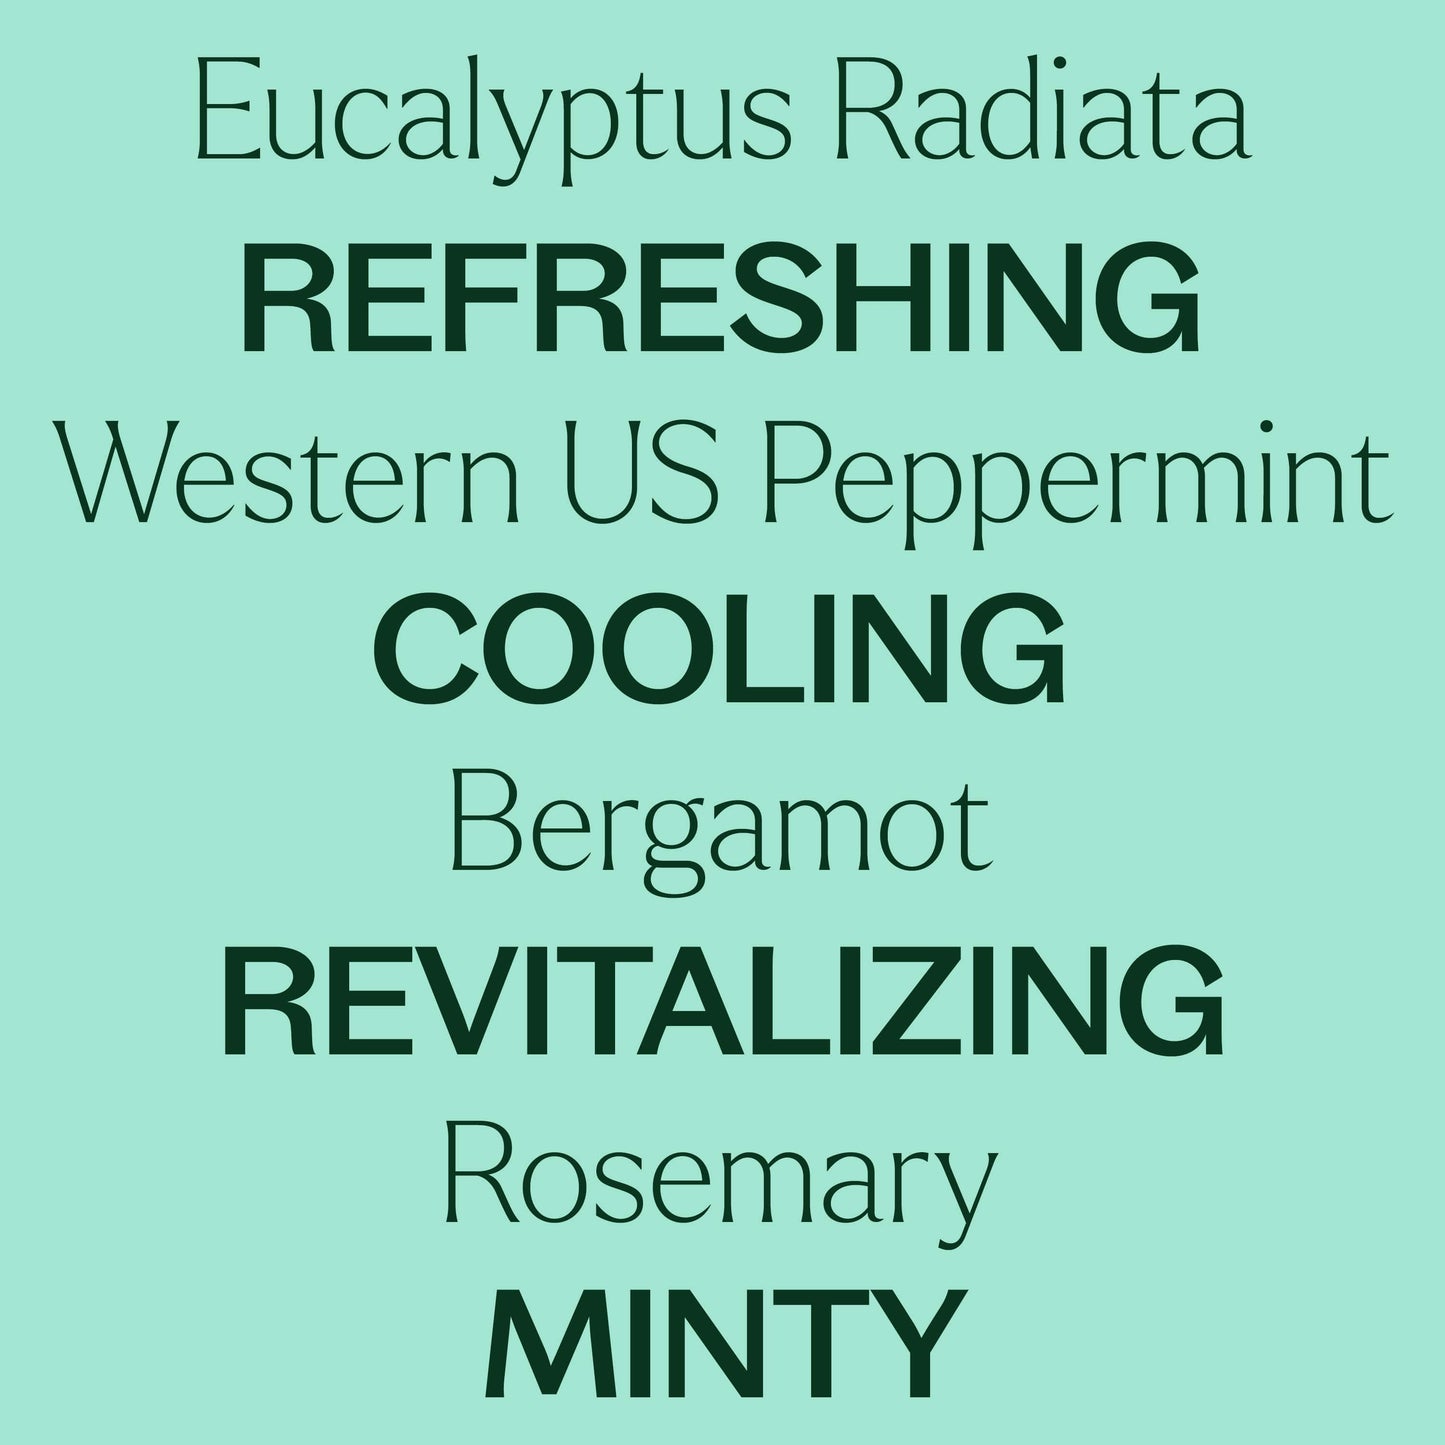 Eucalyptus Mint Essential Oil Blend is refreshing, cooling, revitalizing, minty